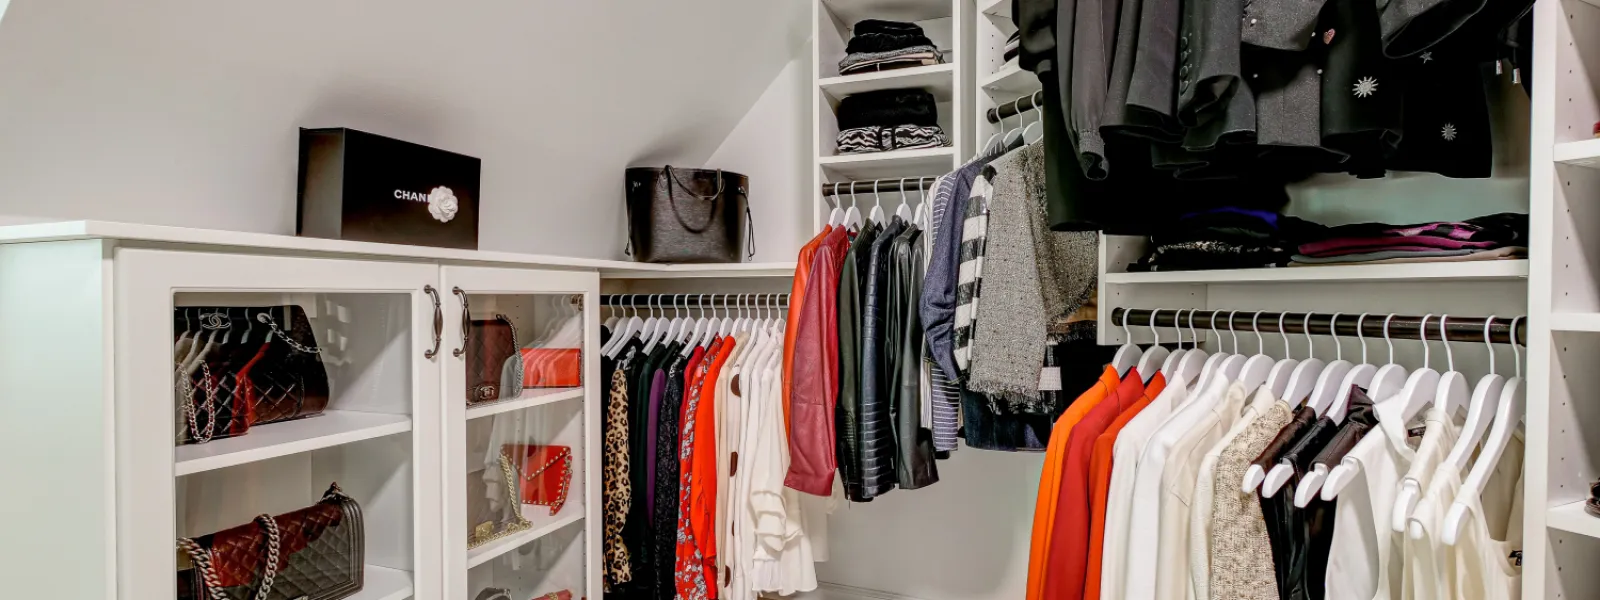 a master closet with clothing hanging on racks